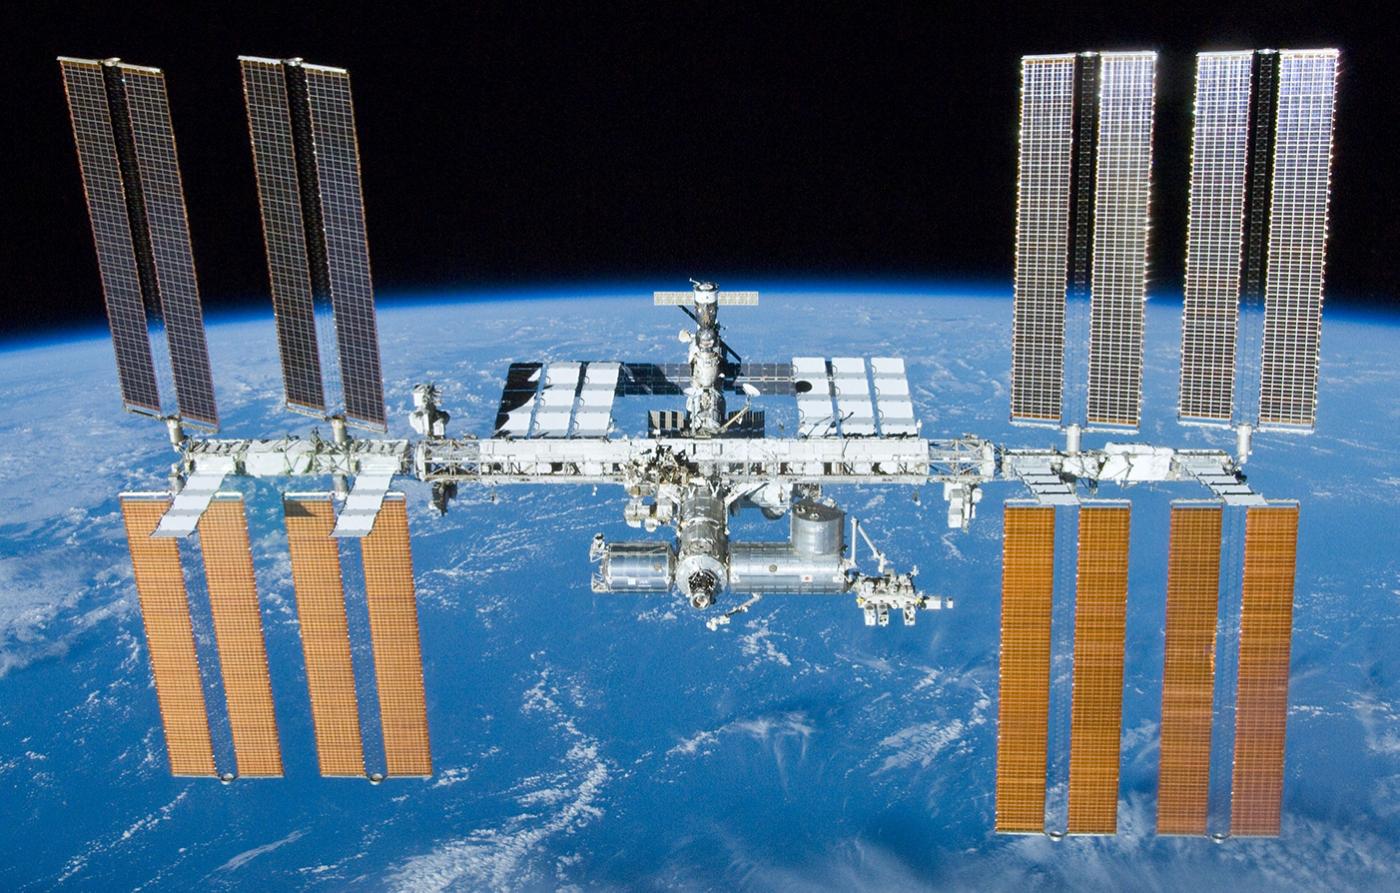 A view of the International Space Station from space shuttle Atlantis taken on May 23, 2010. Photo: NASA